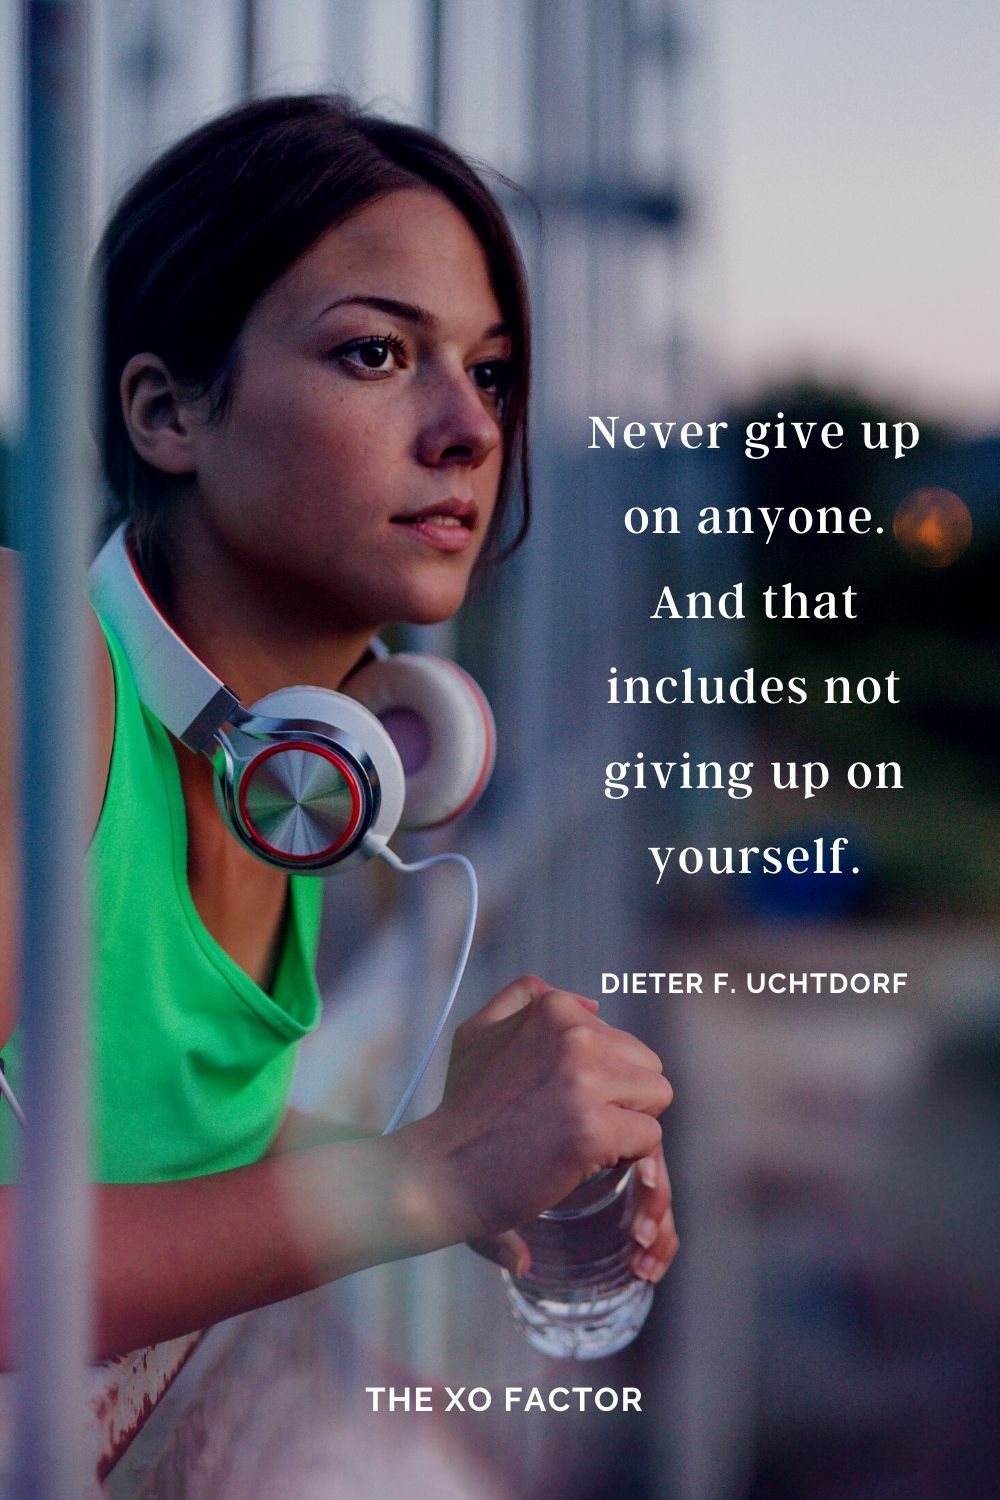 Never give up on anyone. And that includes not giving up on yourself. Dieter F. Uchtdorf